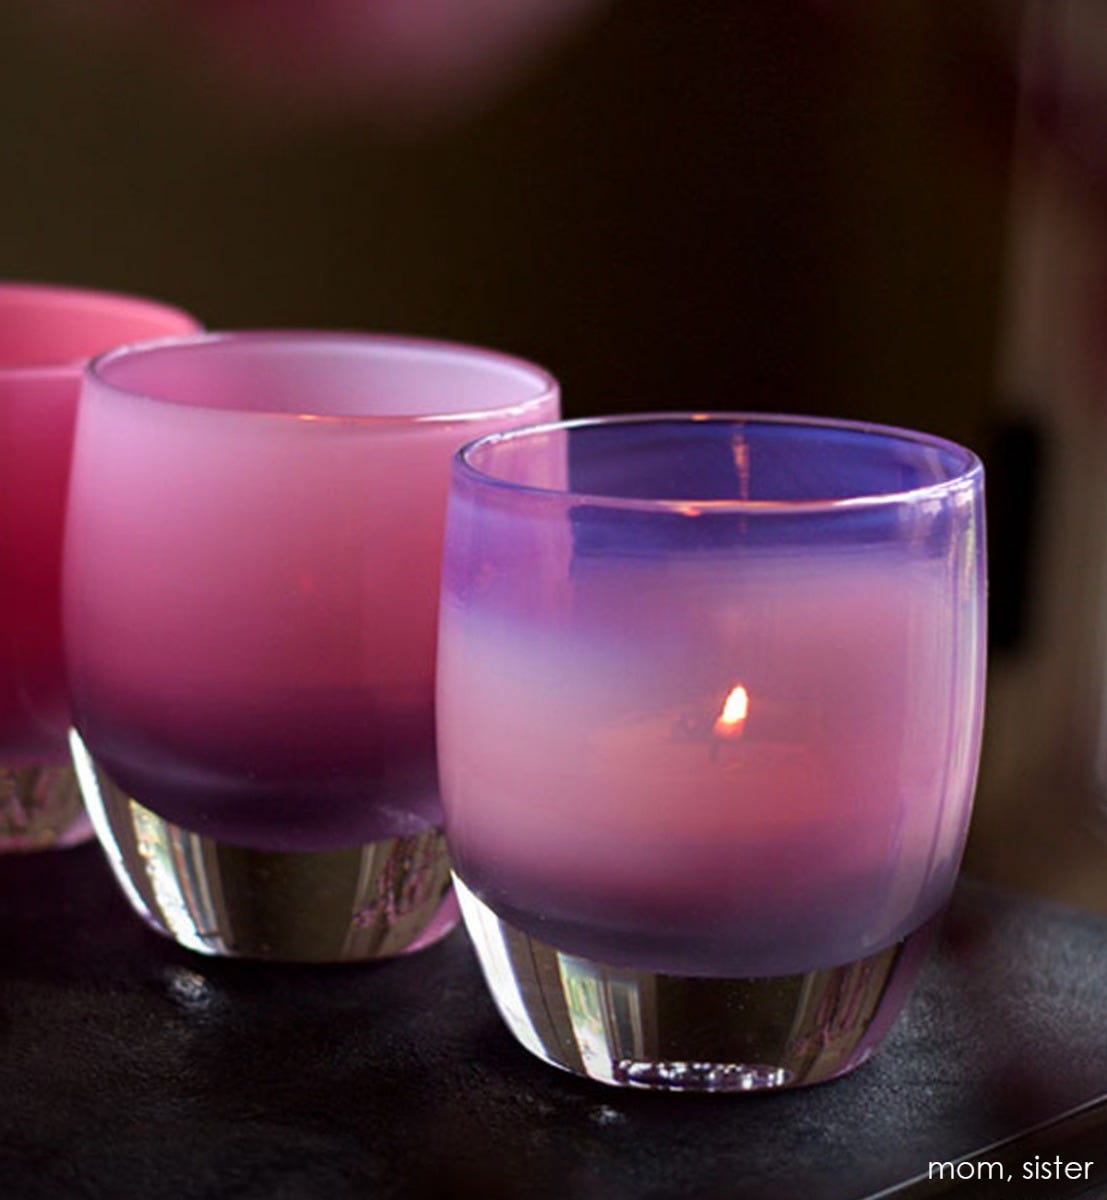 sister mauve purple hand-blown glass votive candle holder. Paired with mom.